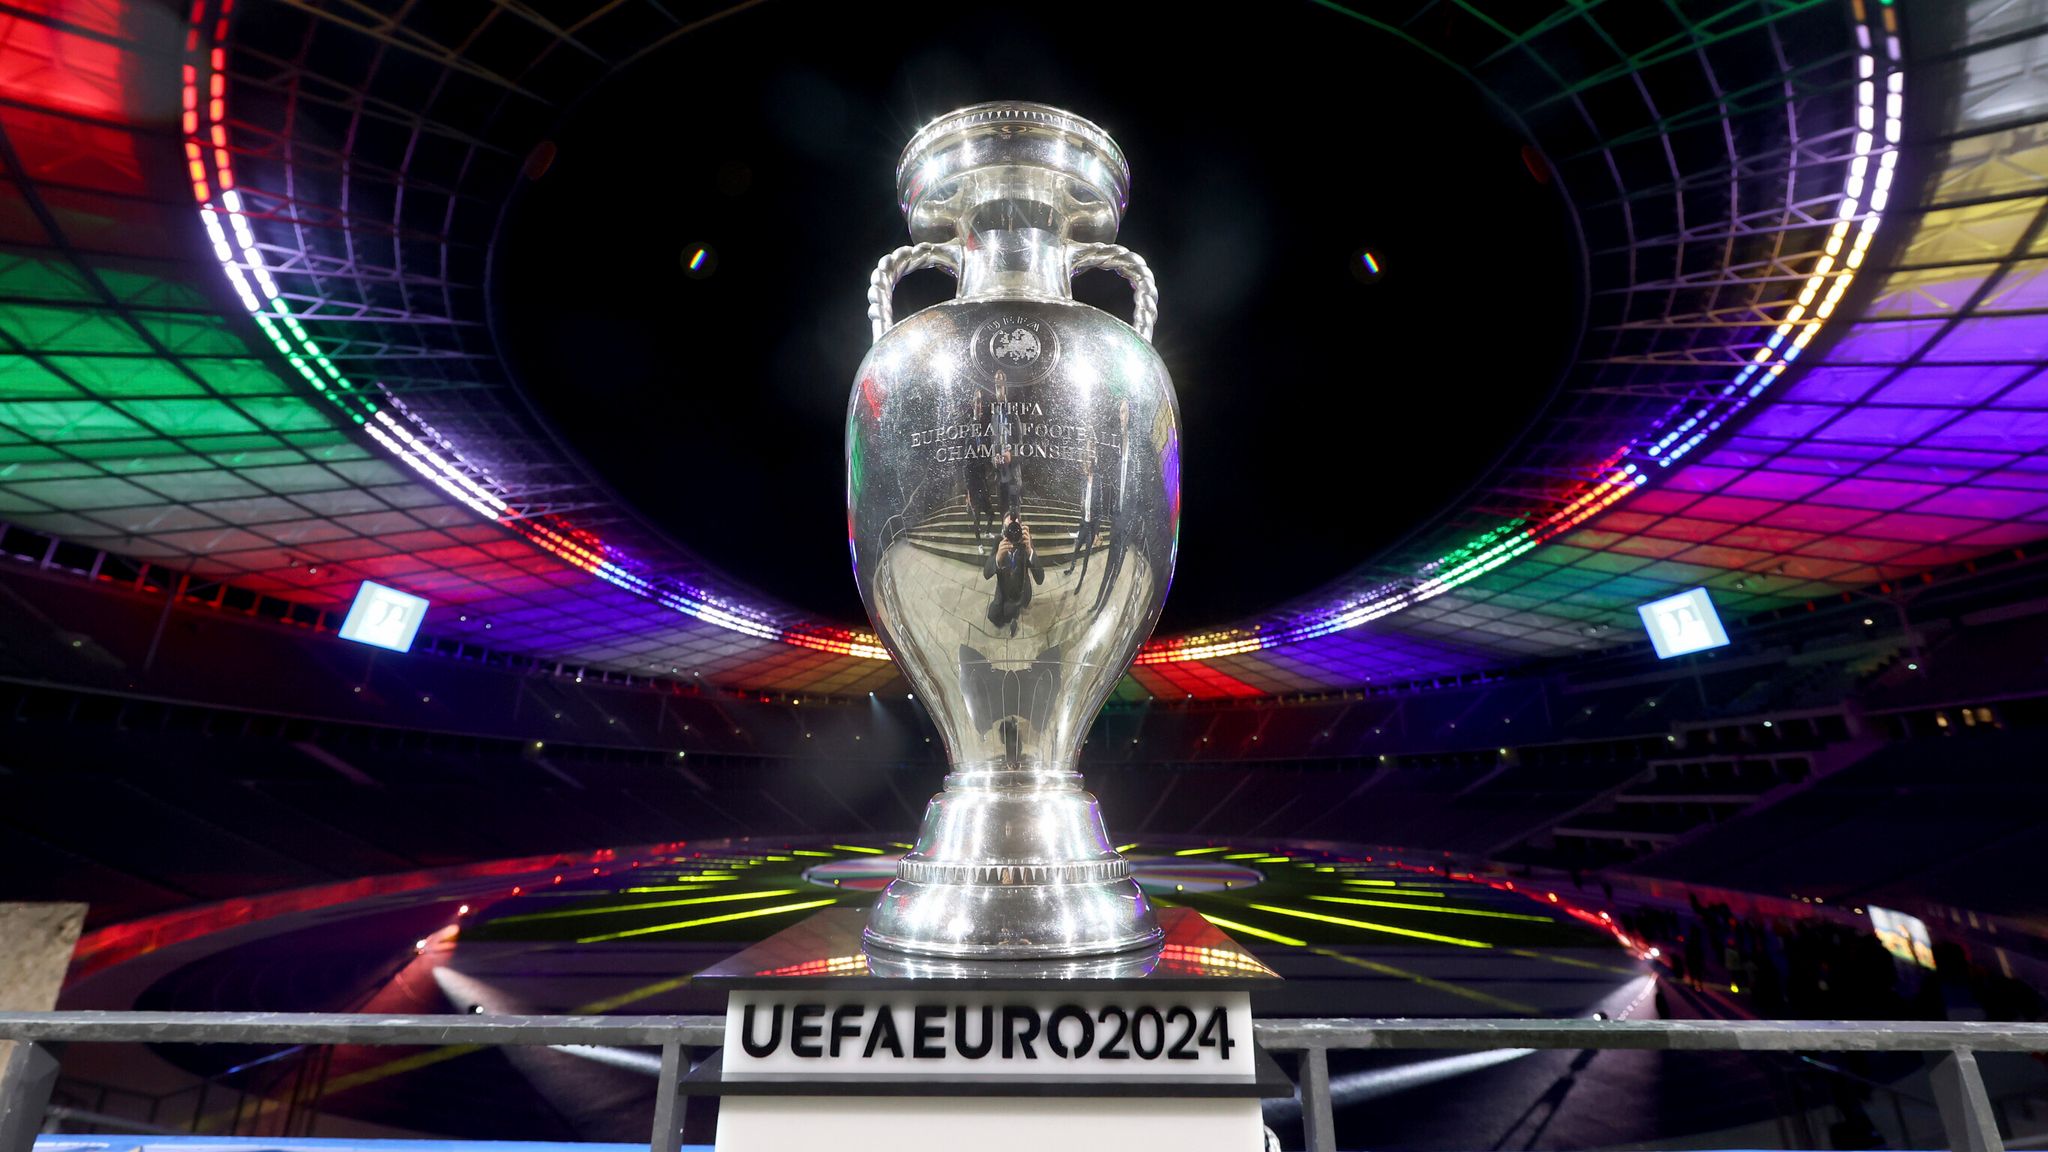 Euro's 2024 Qualification League Table & Standings Update